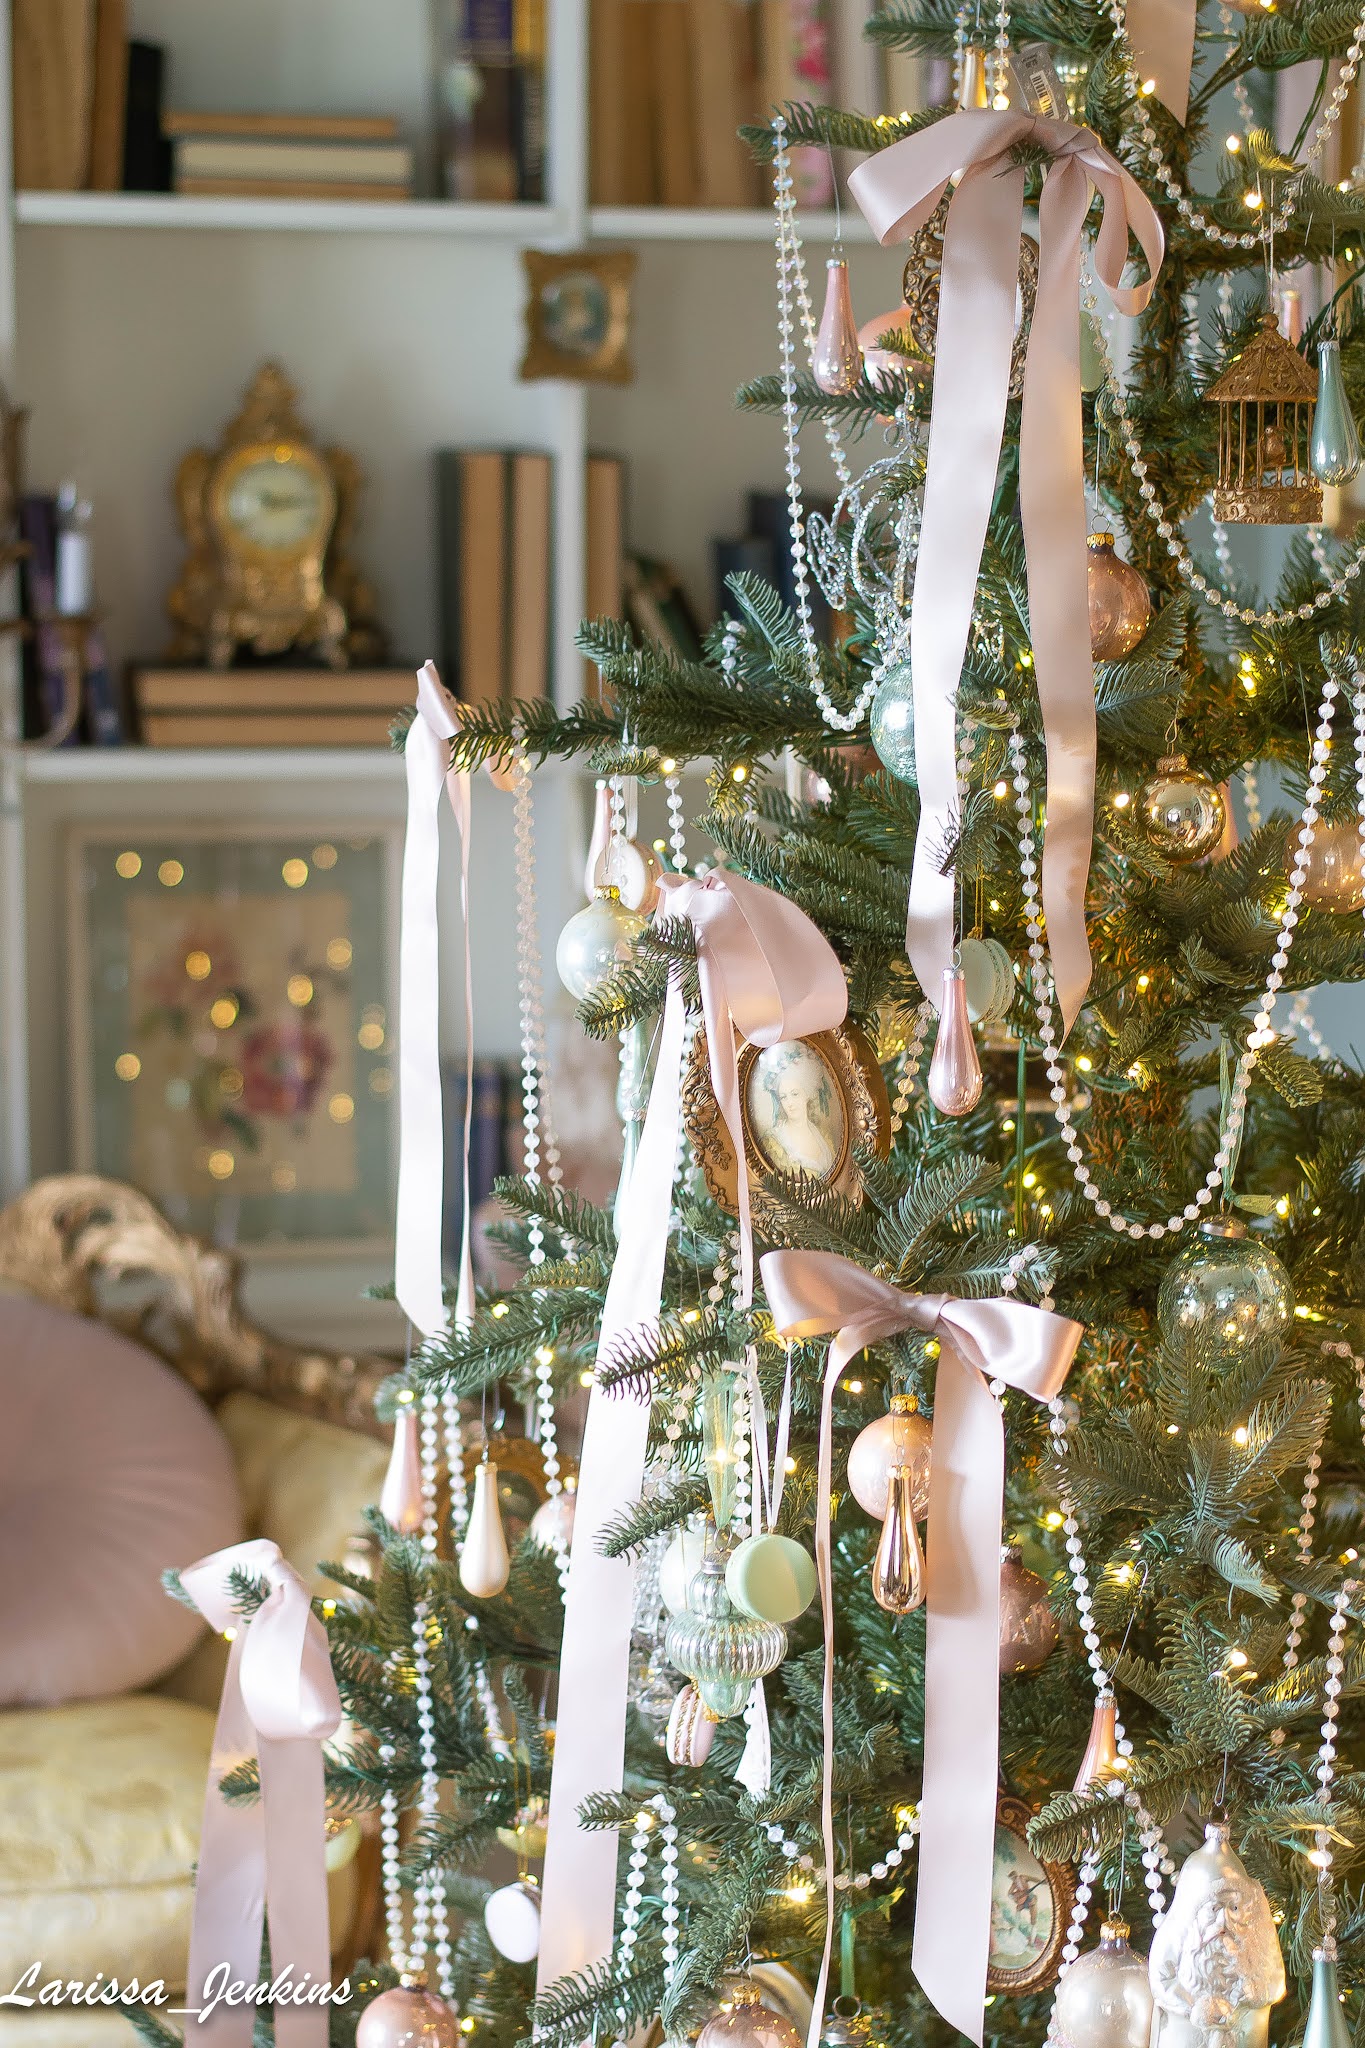 Beautiful French country Christmas tree with pink ribbon and Old World style - Larissa Jenkins of Welch House 1900. #frenchchristmas #pinkchristmas